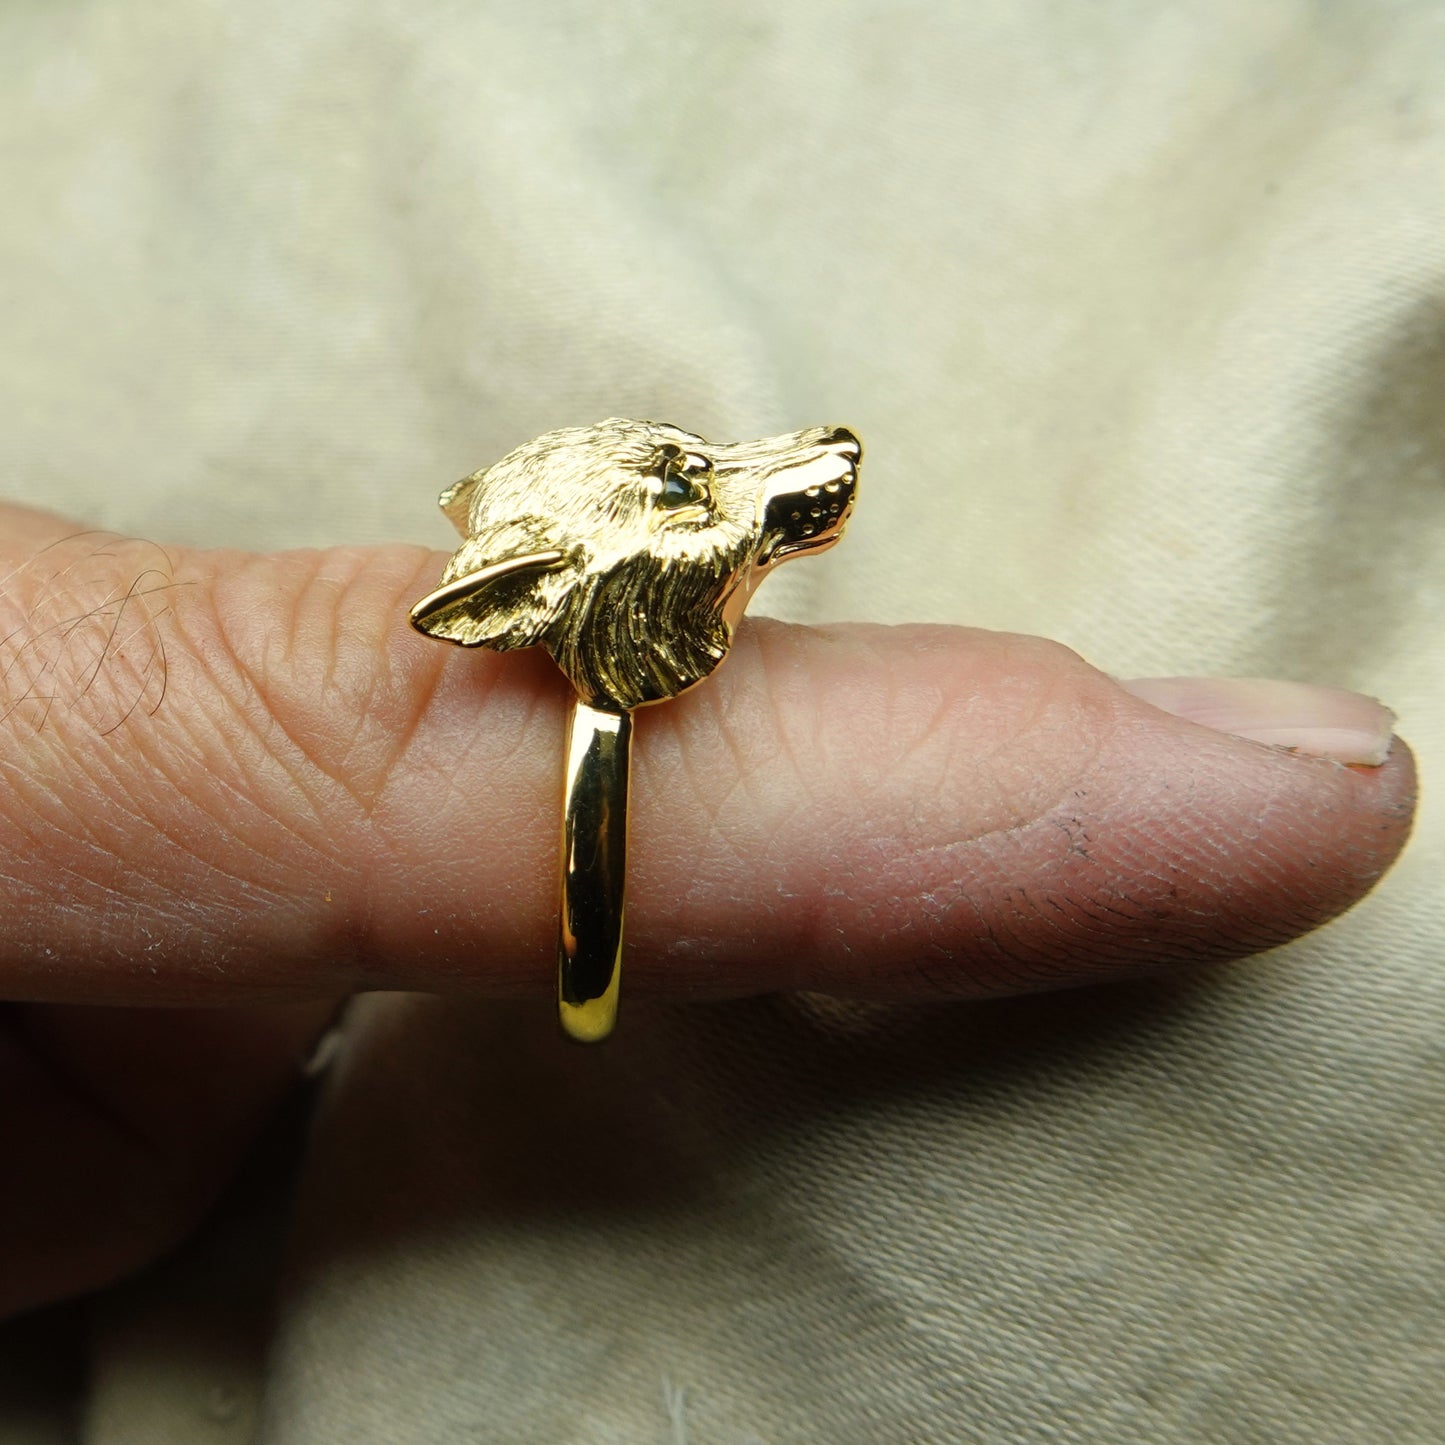 Gold wolf ring. Wolf's head ring with natural peridot gemstone eyes. *This piece is finished and ready to be shipped* © Adrian Ashley